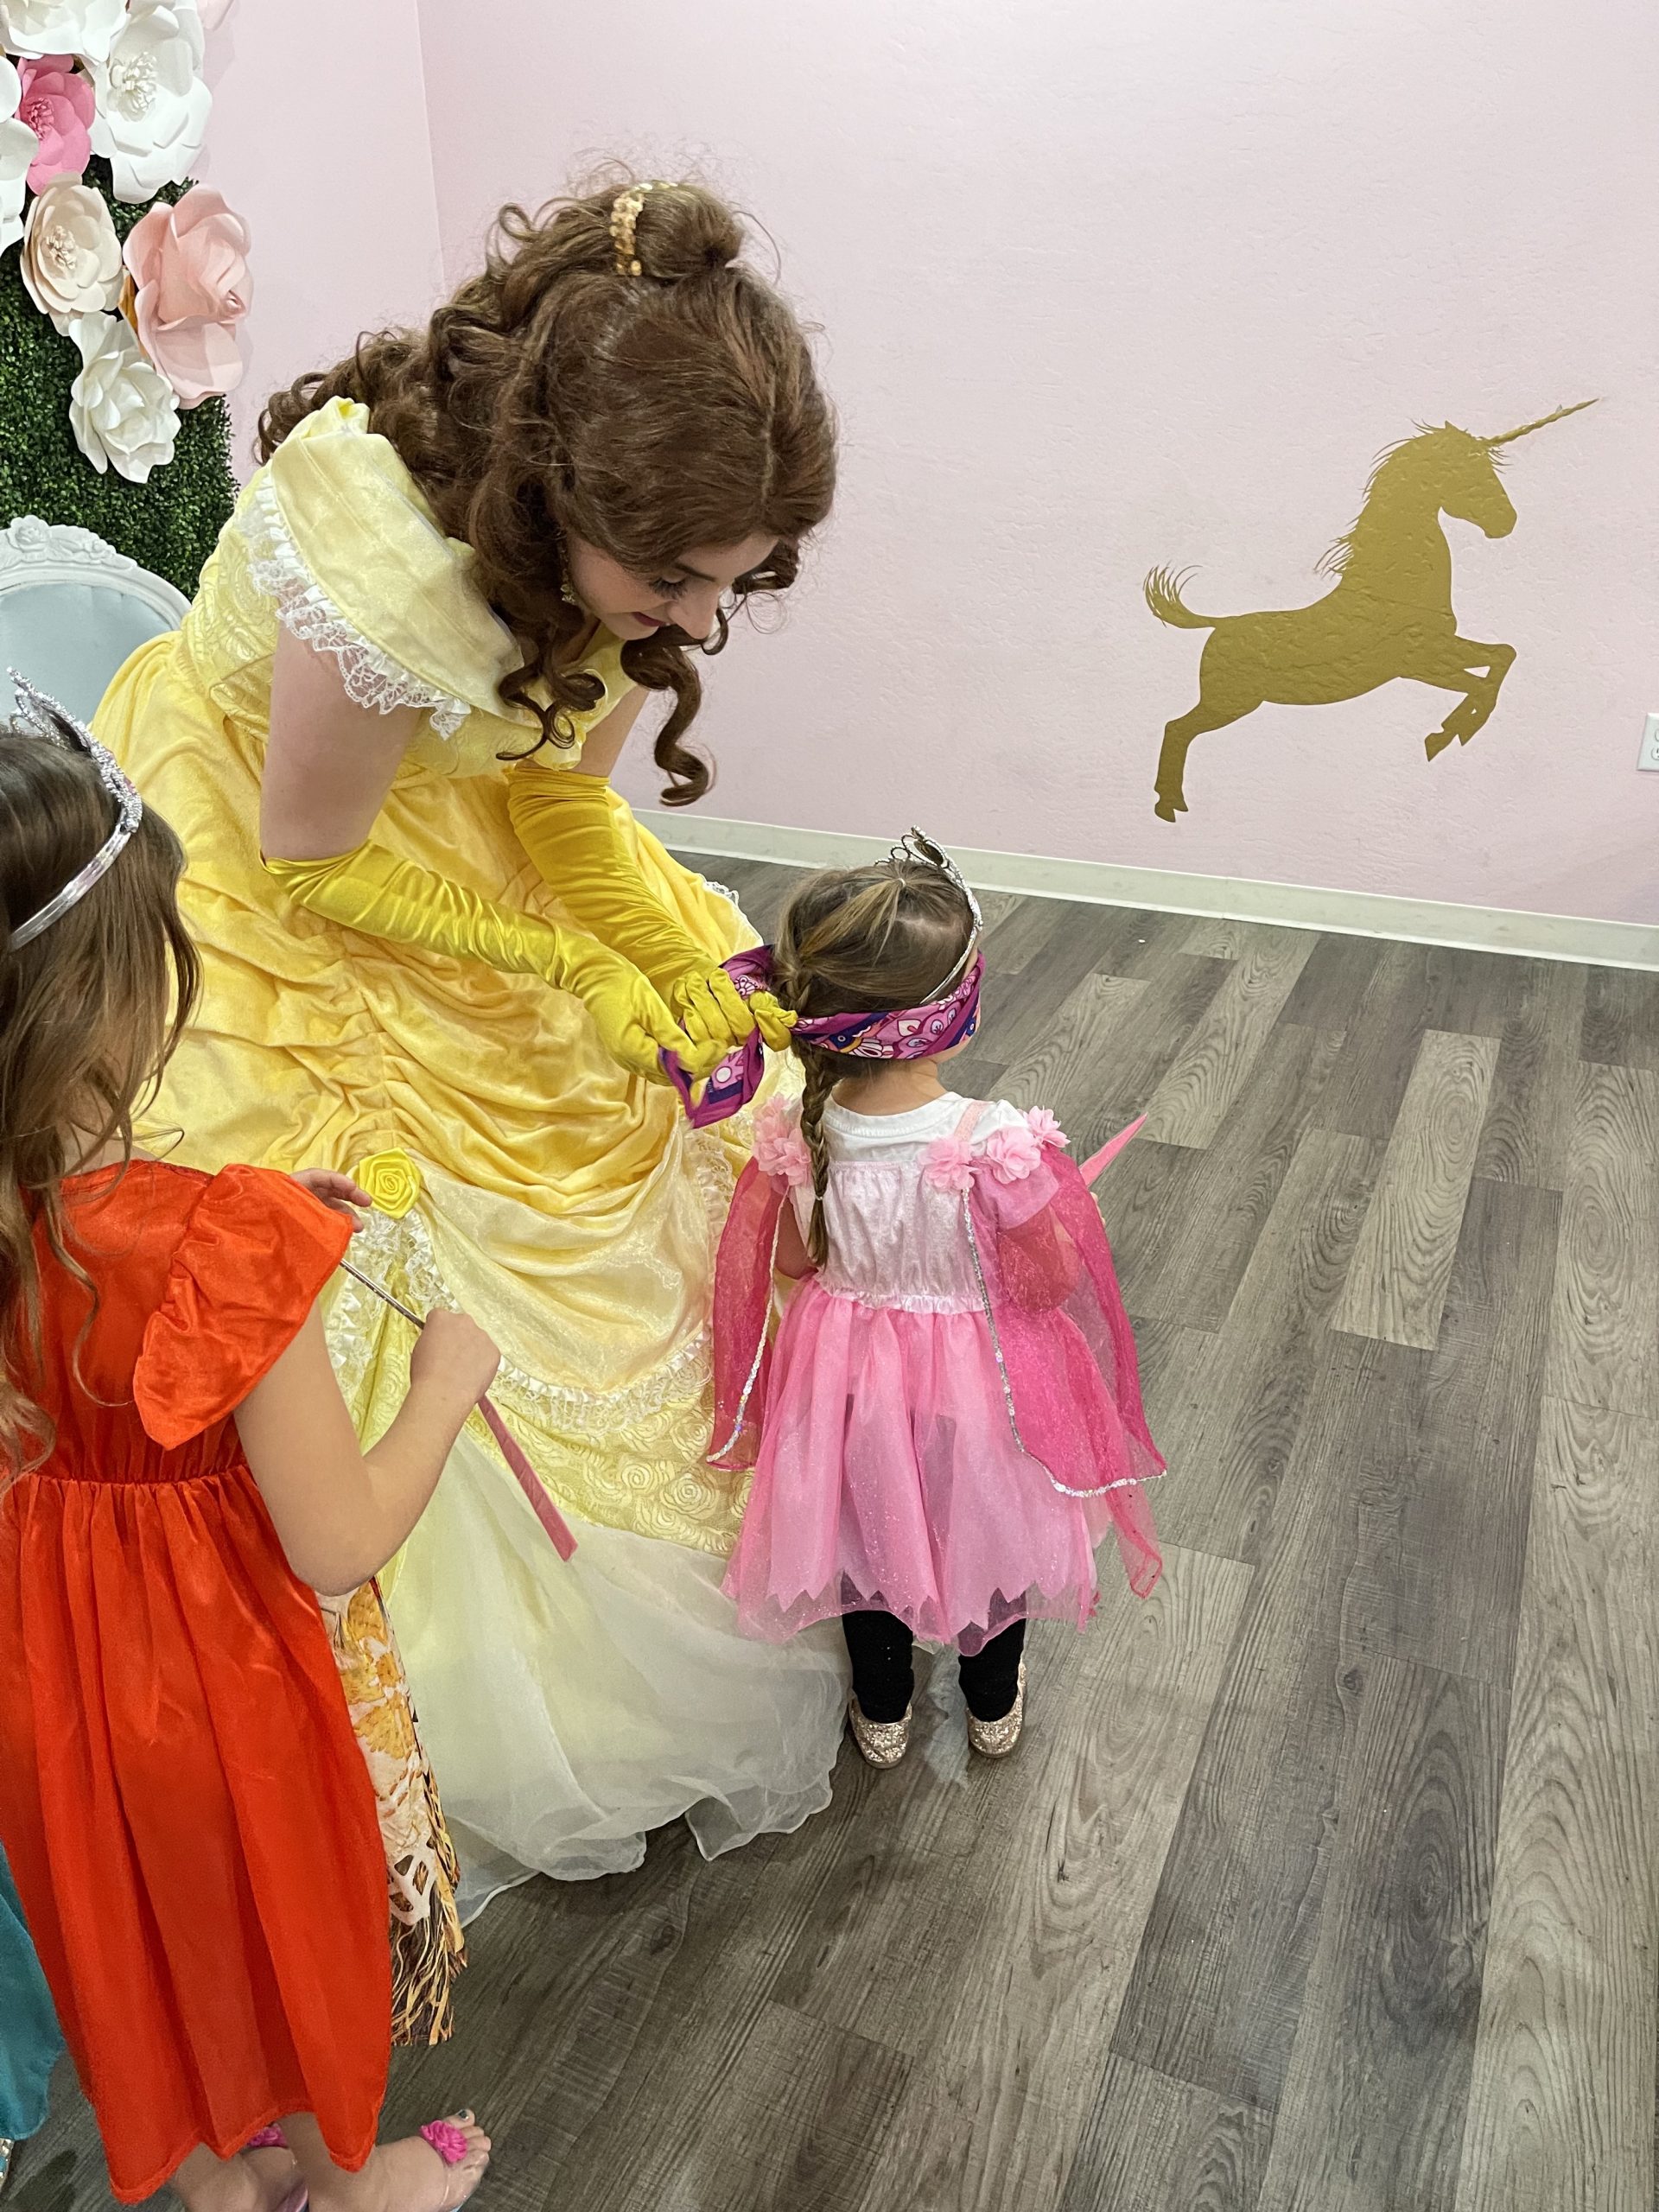 Belle helping a little girl play Pin the Horn on the Unicorn